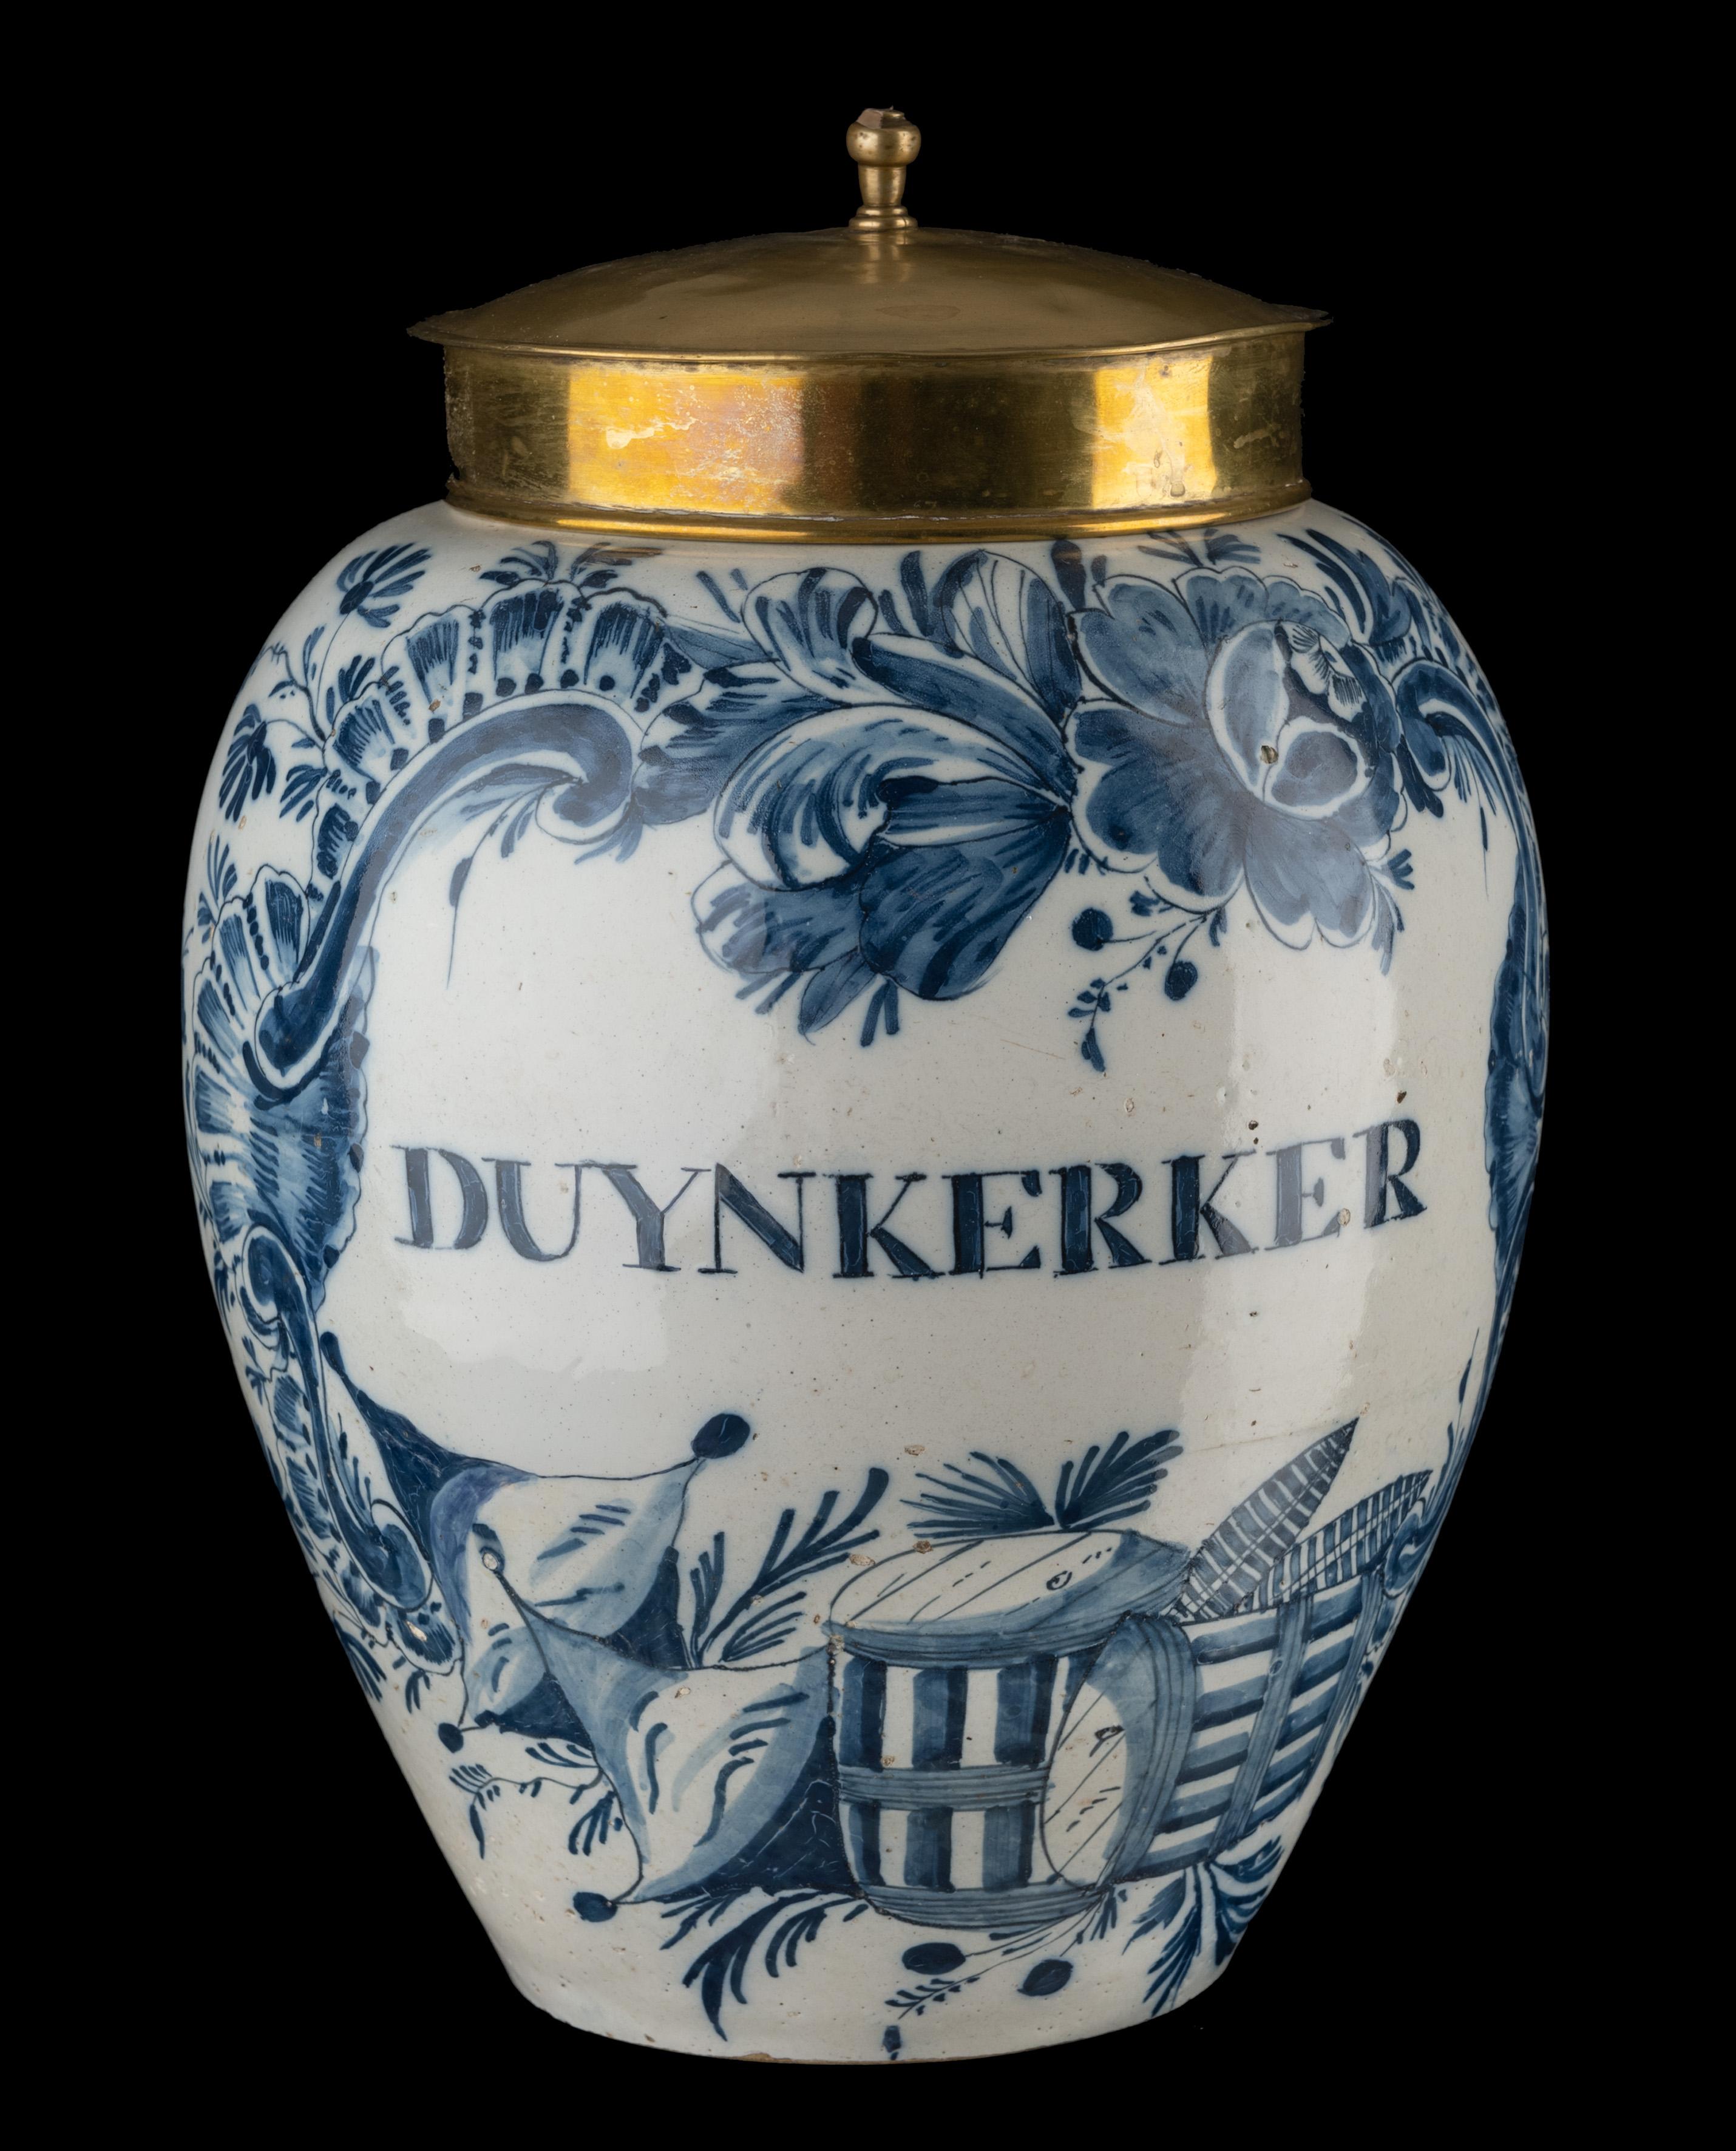 Blue and white DUYNKERKER tobacco jar
Delft, 1760-1780

The ovoid tobacco jar with copper lid has a groove on the shoulder at the top and a protruding rim. The jar is painted in blue with a cartouche containing the inscription DUYNKERKER. The